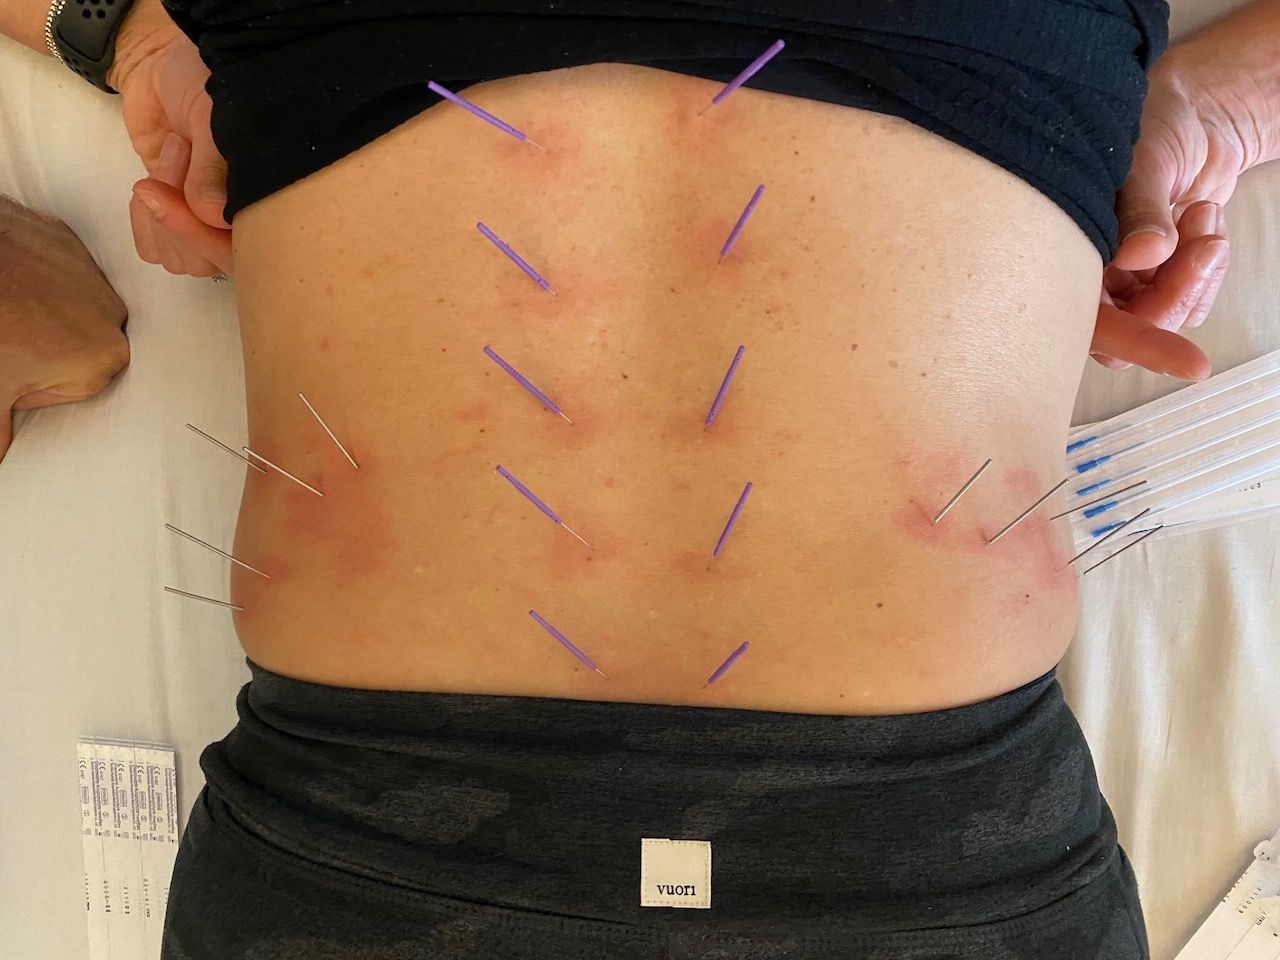 Can Dry Needling Help with Neurological Conditions?